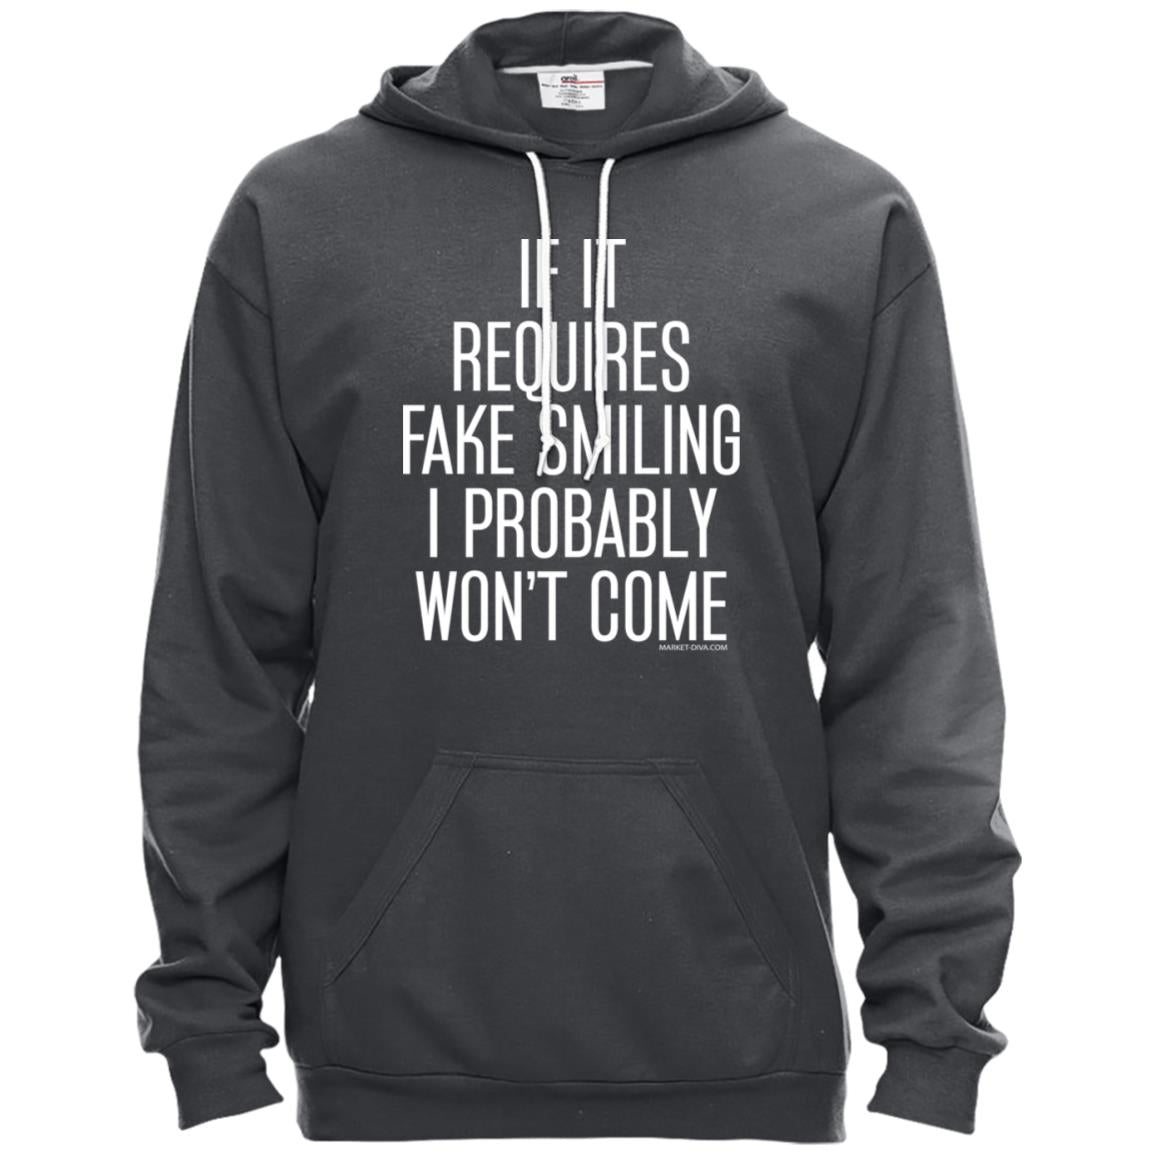 Hoodie: Not Coming if Requires Fake Smiling